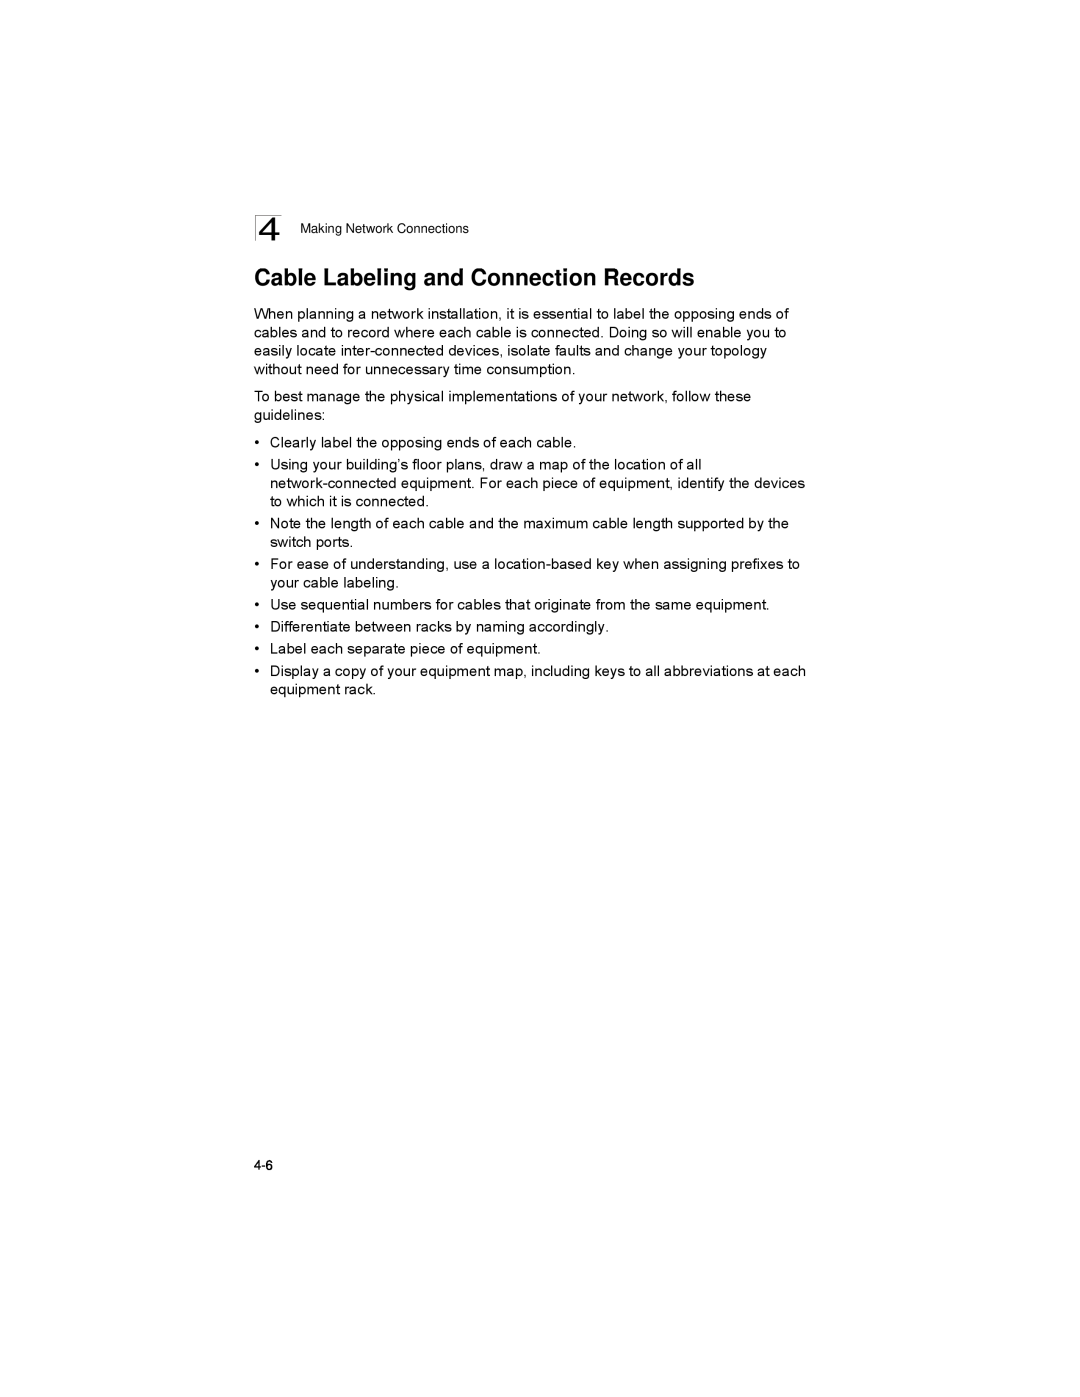 Alcatel-Lucent 6300-24 manual Cable Labeling and Connection Records 